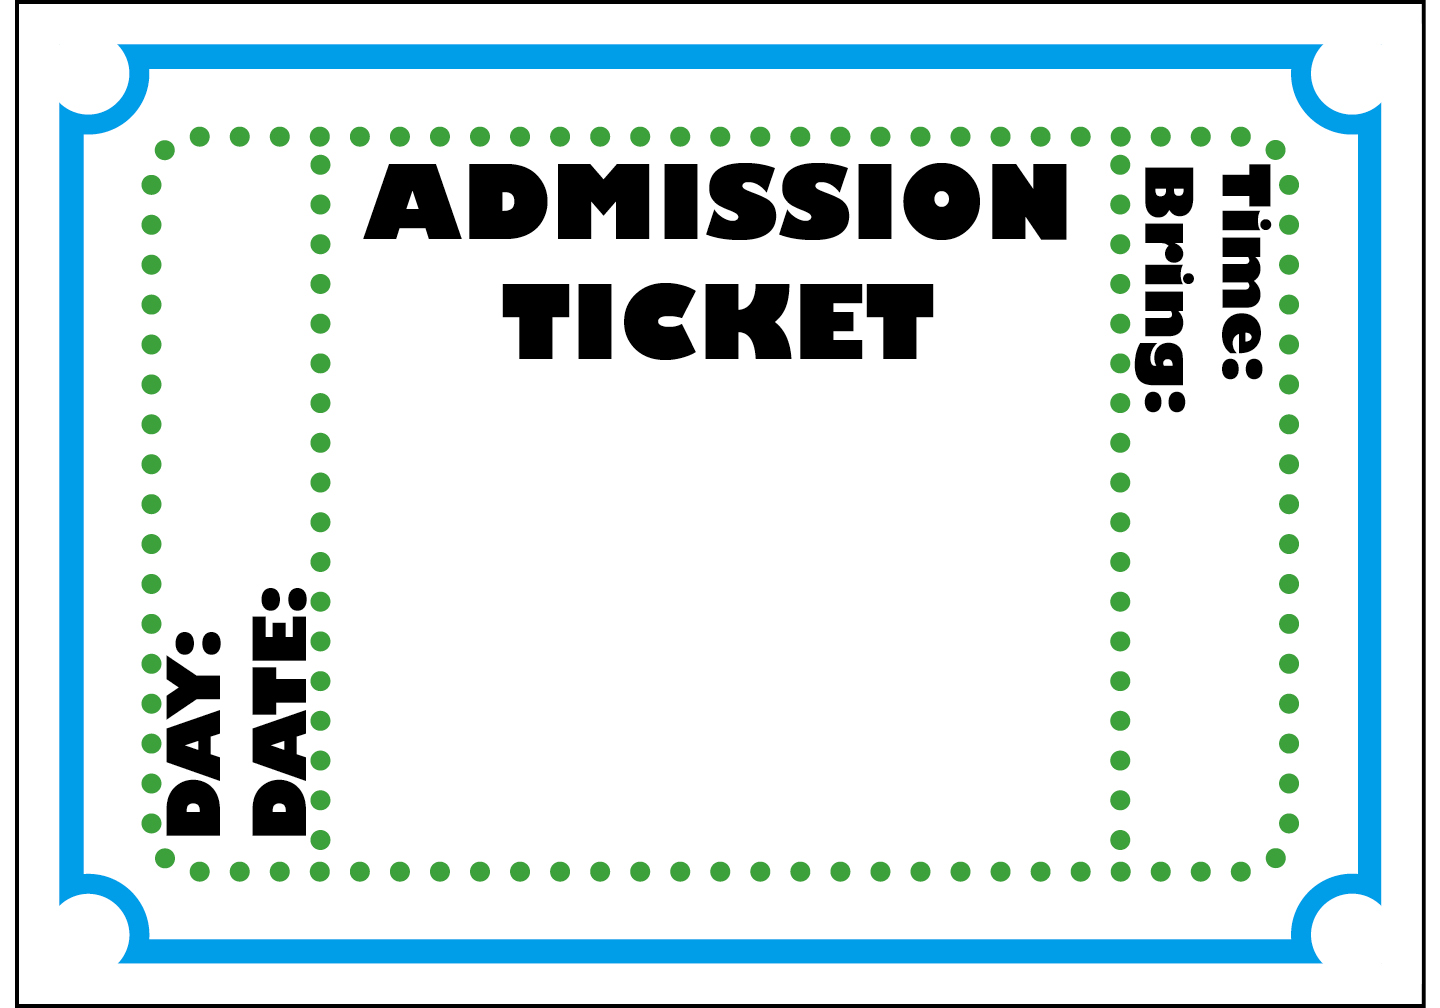 Admission ticket clipart